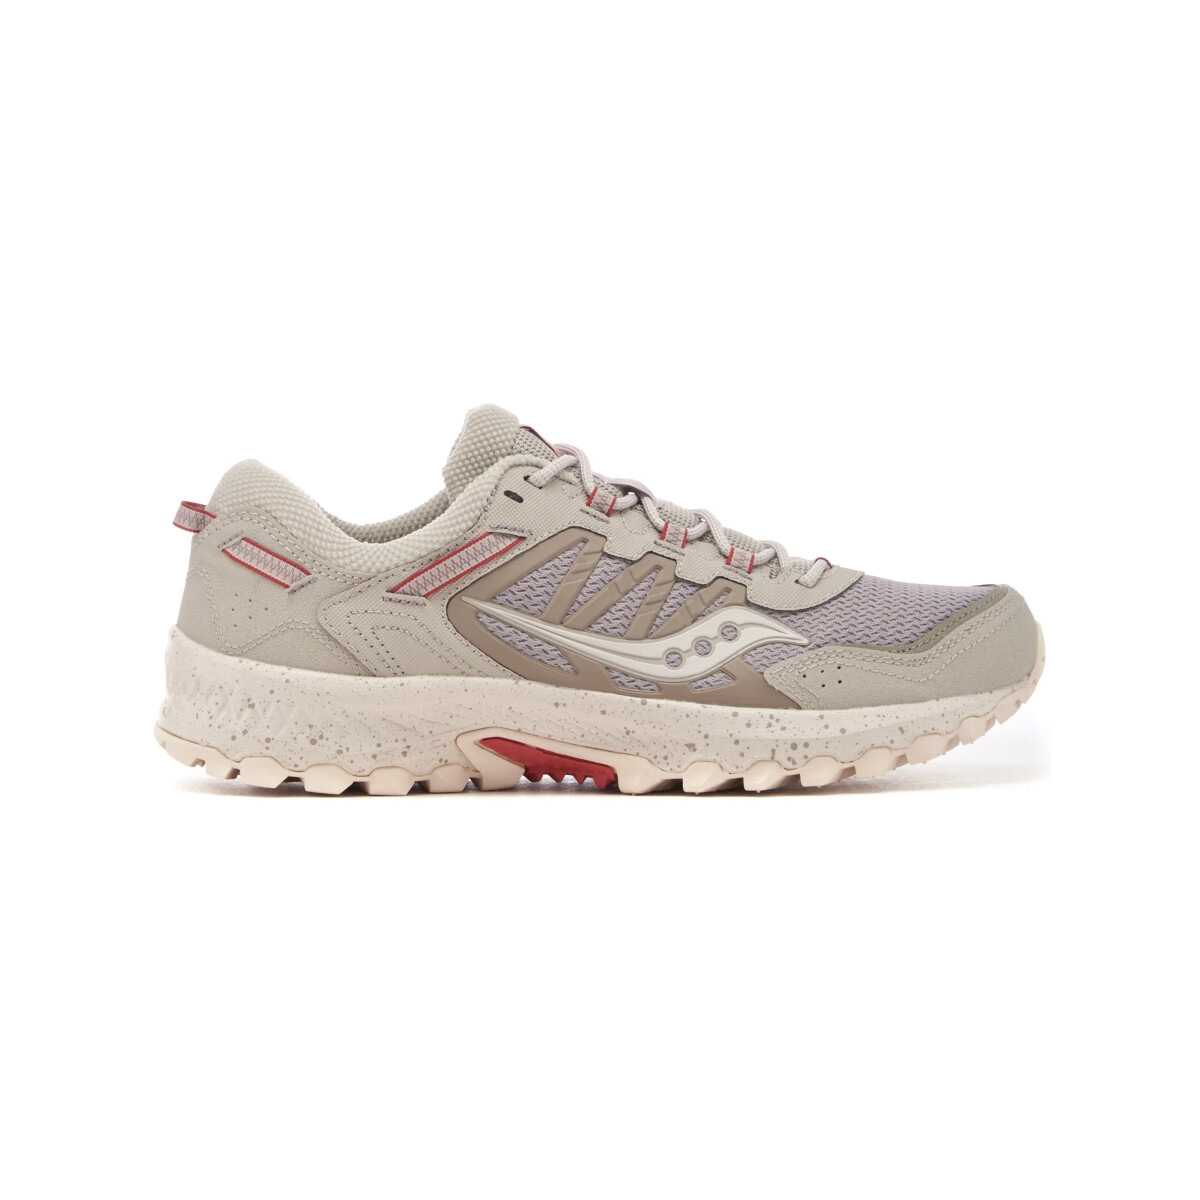 Chaussures Homme Baskets basses Saucony S70814-1 Gris